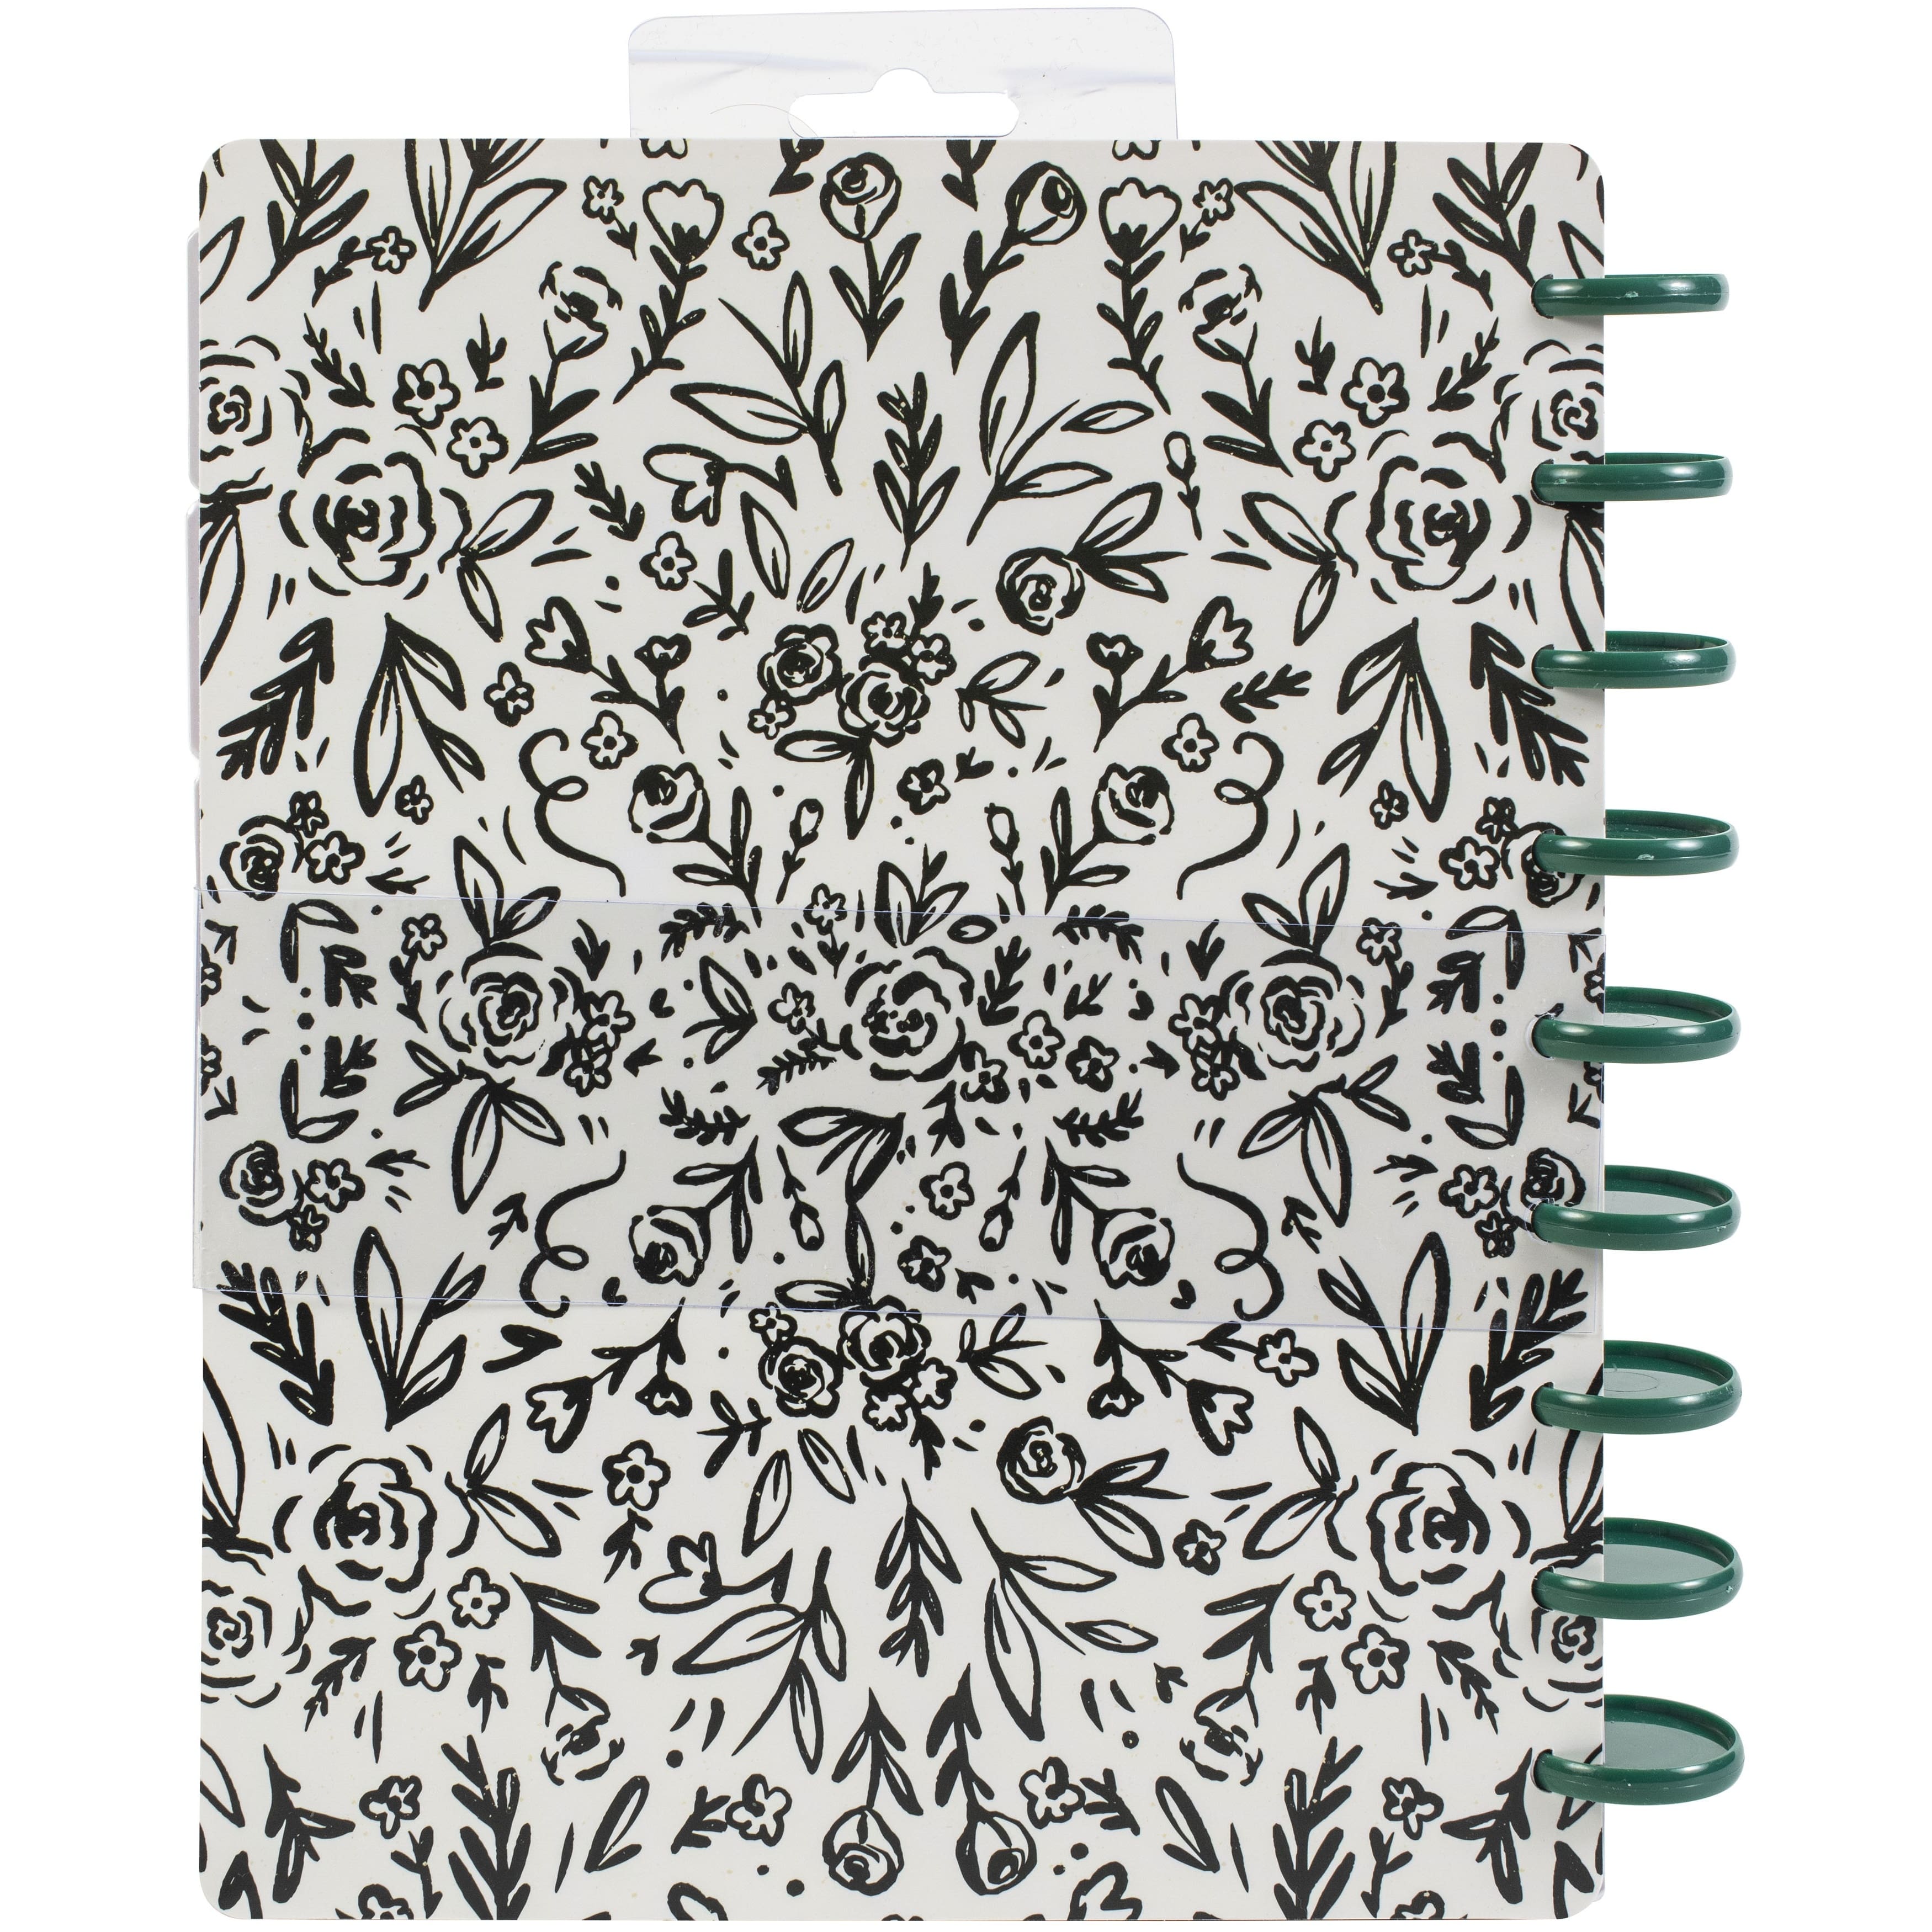 American Crafts&#x2122; Maggie Holmes Day-To-Day Black &#x26; White Floral Undated Dashboard Planner